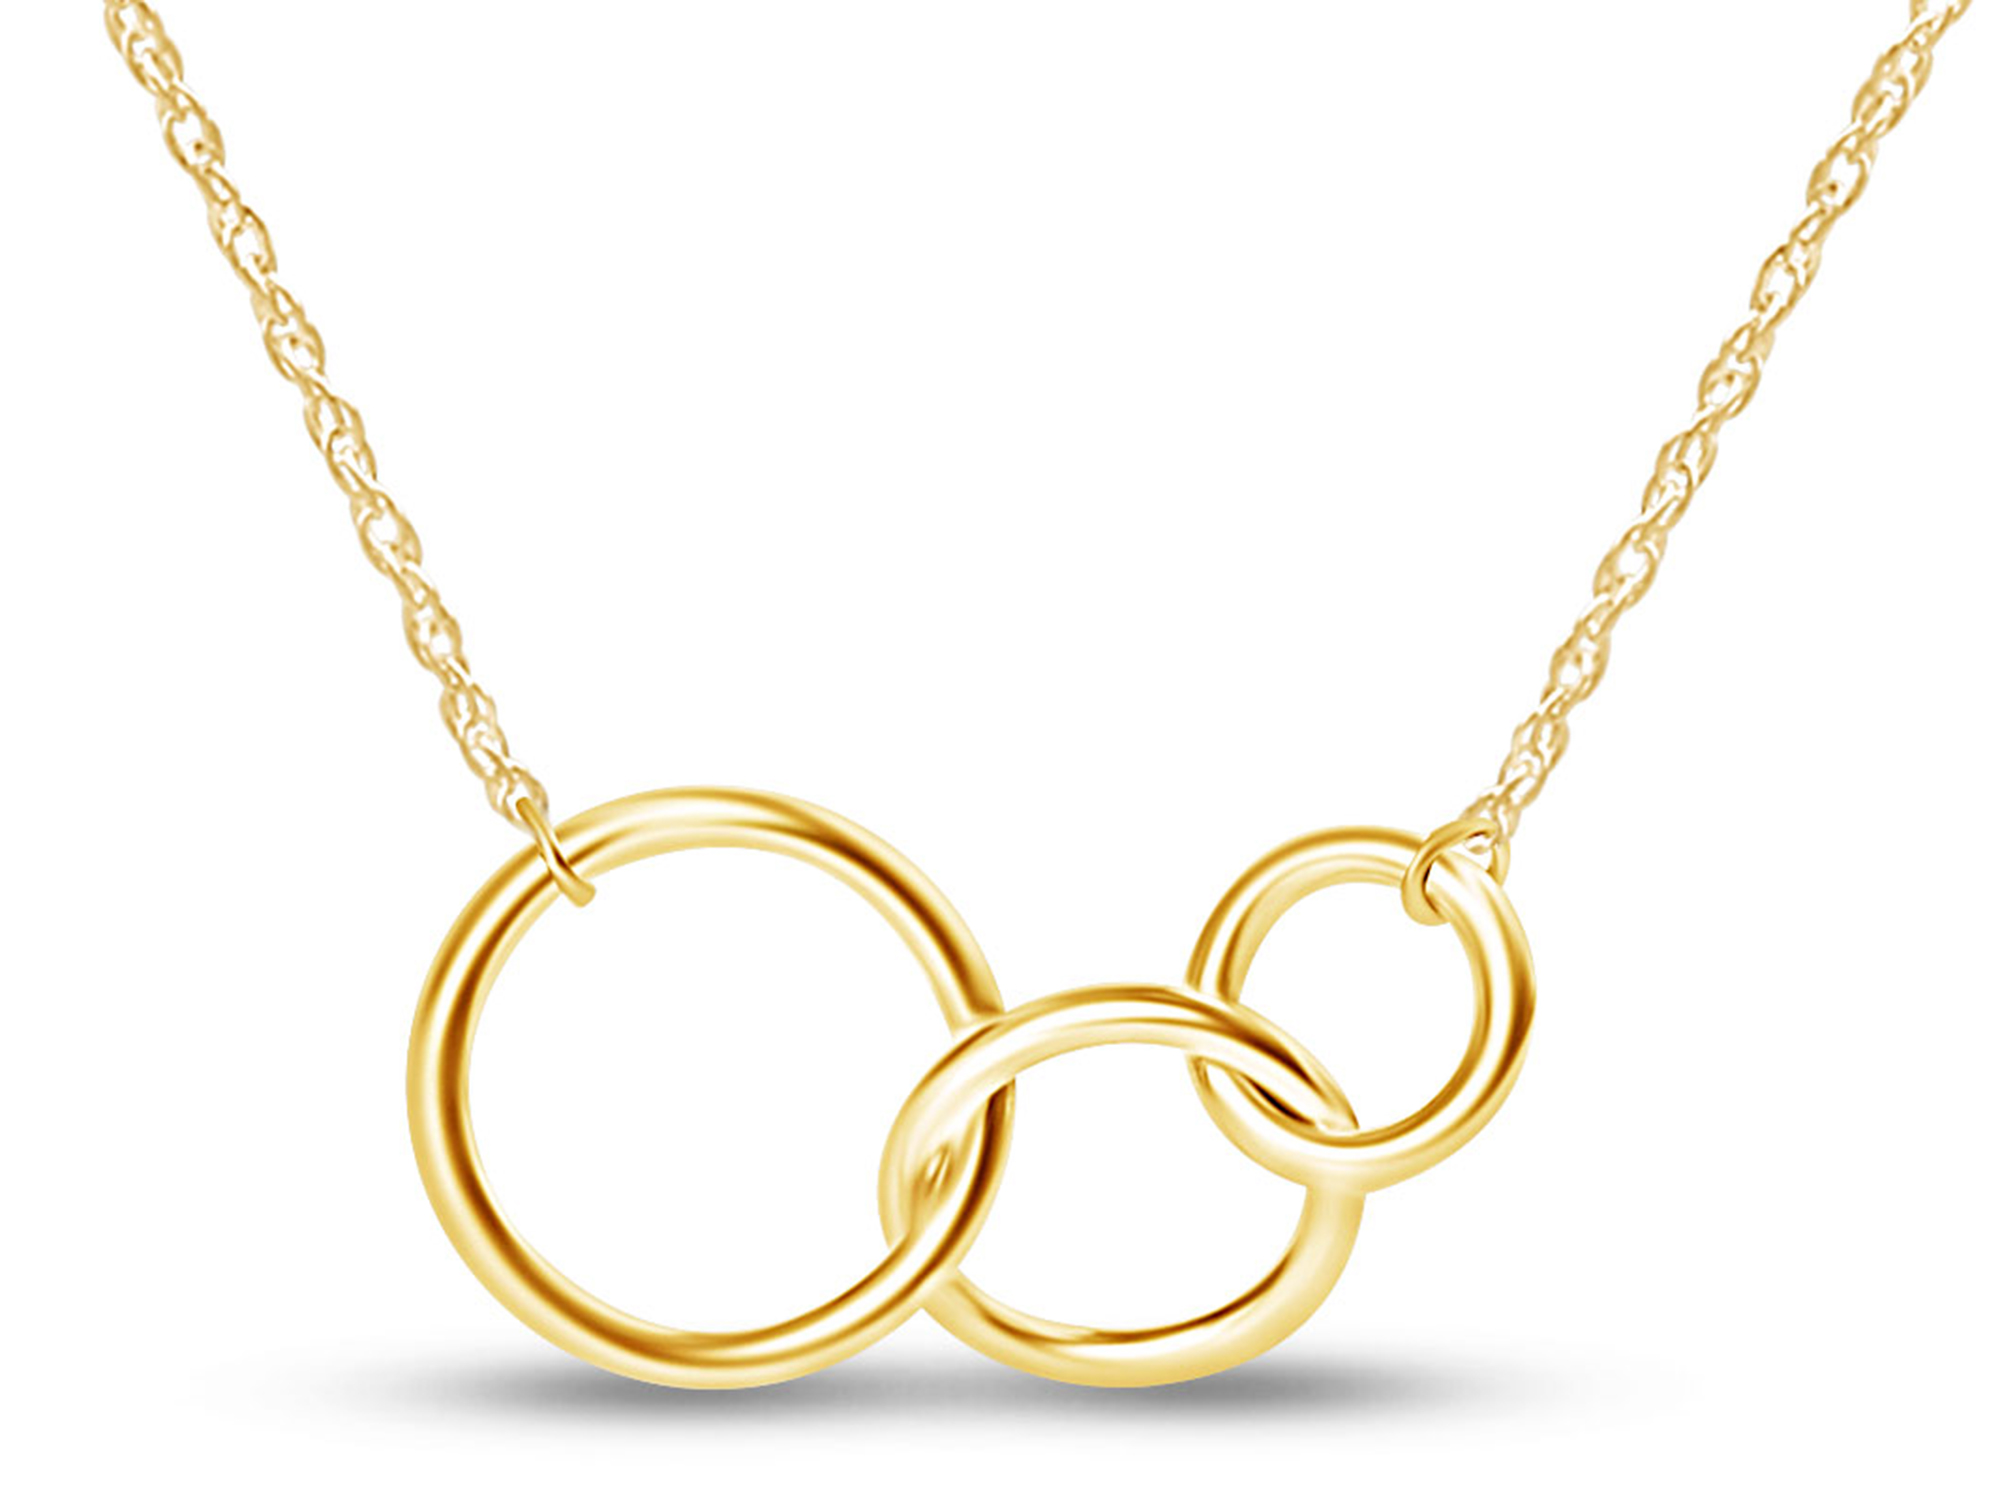 Interlocking Three Infinity Circle Pendant Necklace in 10k Yellow Gold jewelry for Women - image 1 of 1